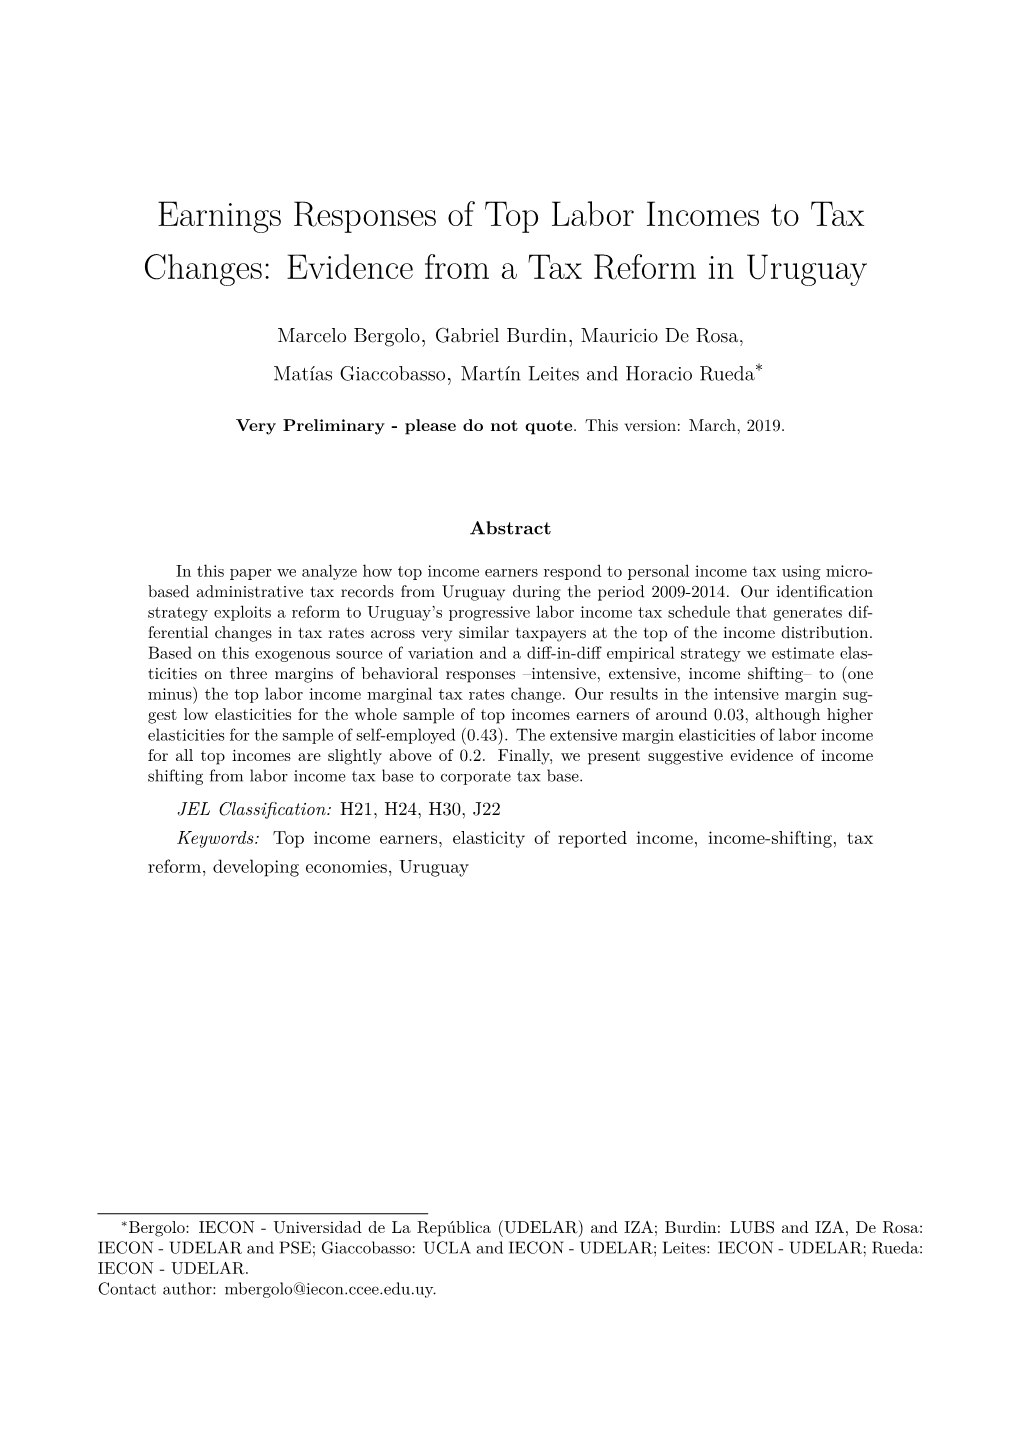 Evidence from a Tax Reform in Uruguay